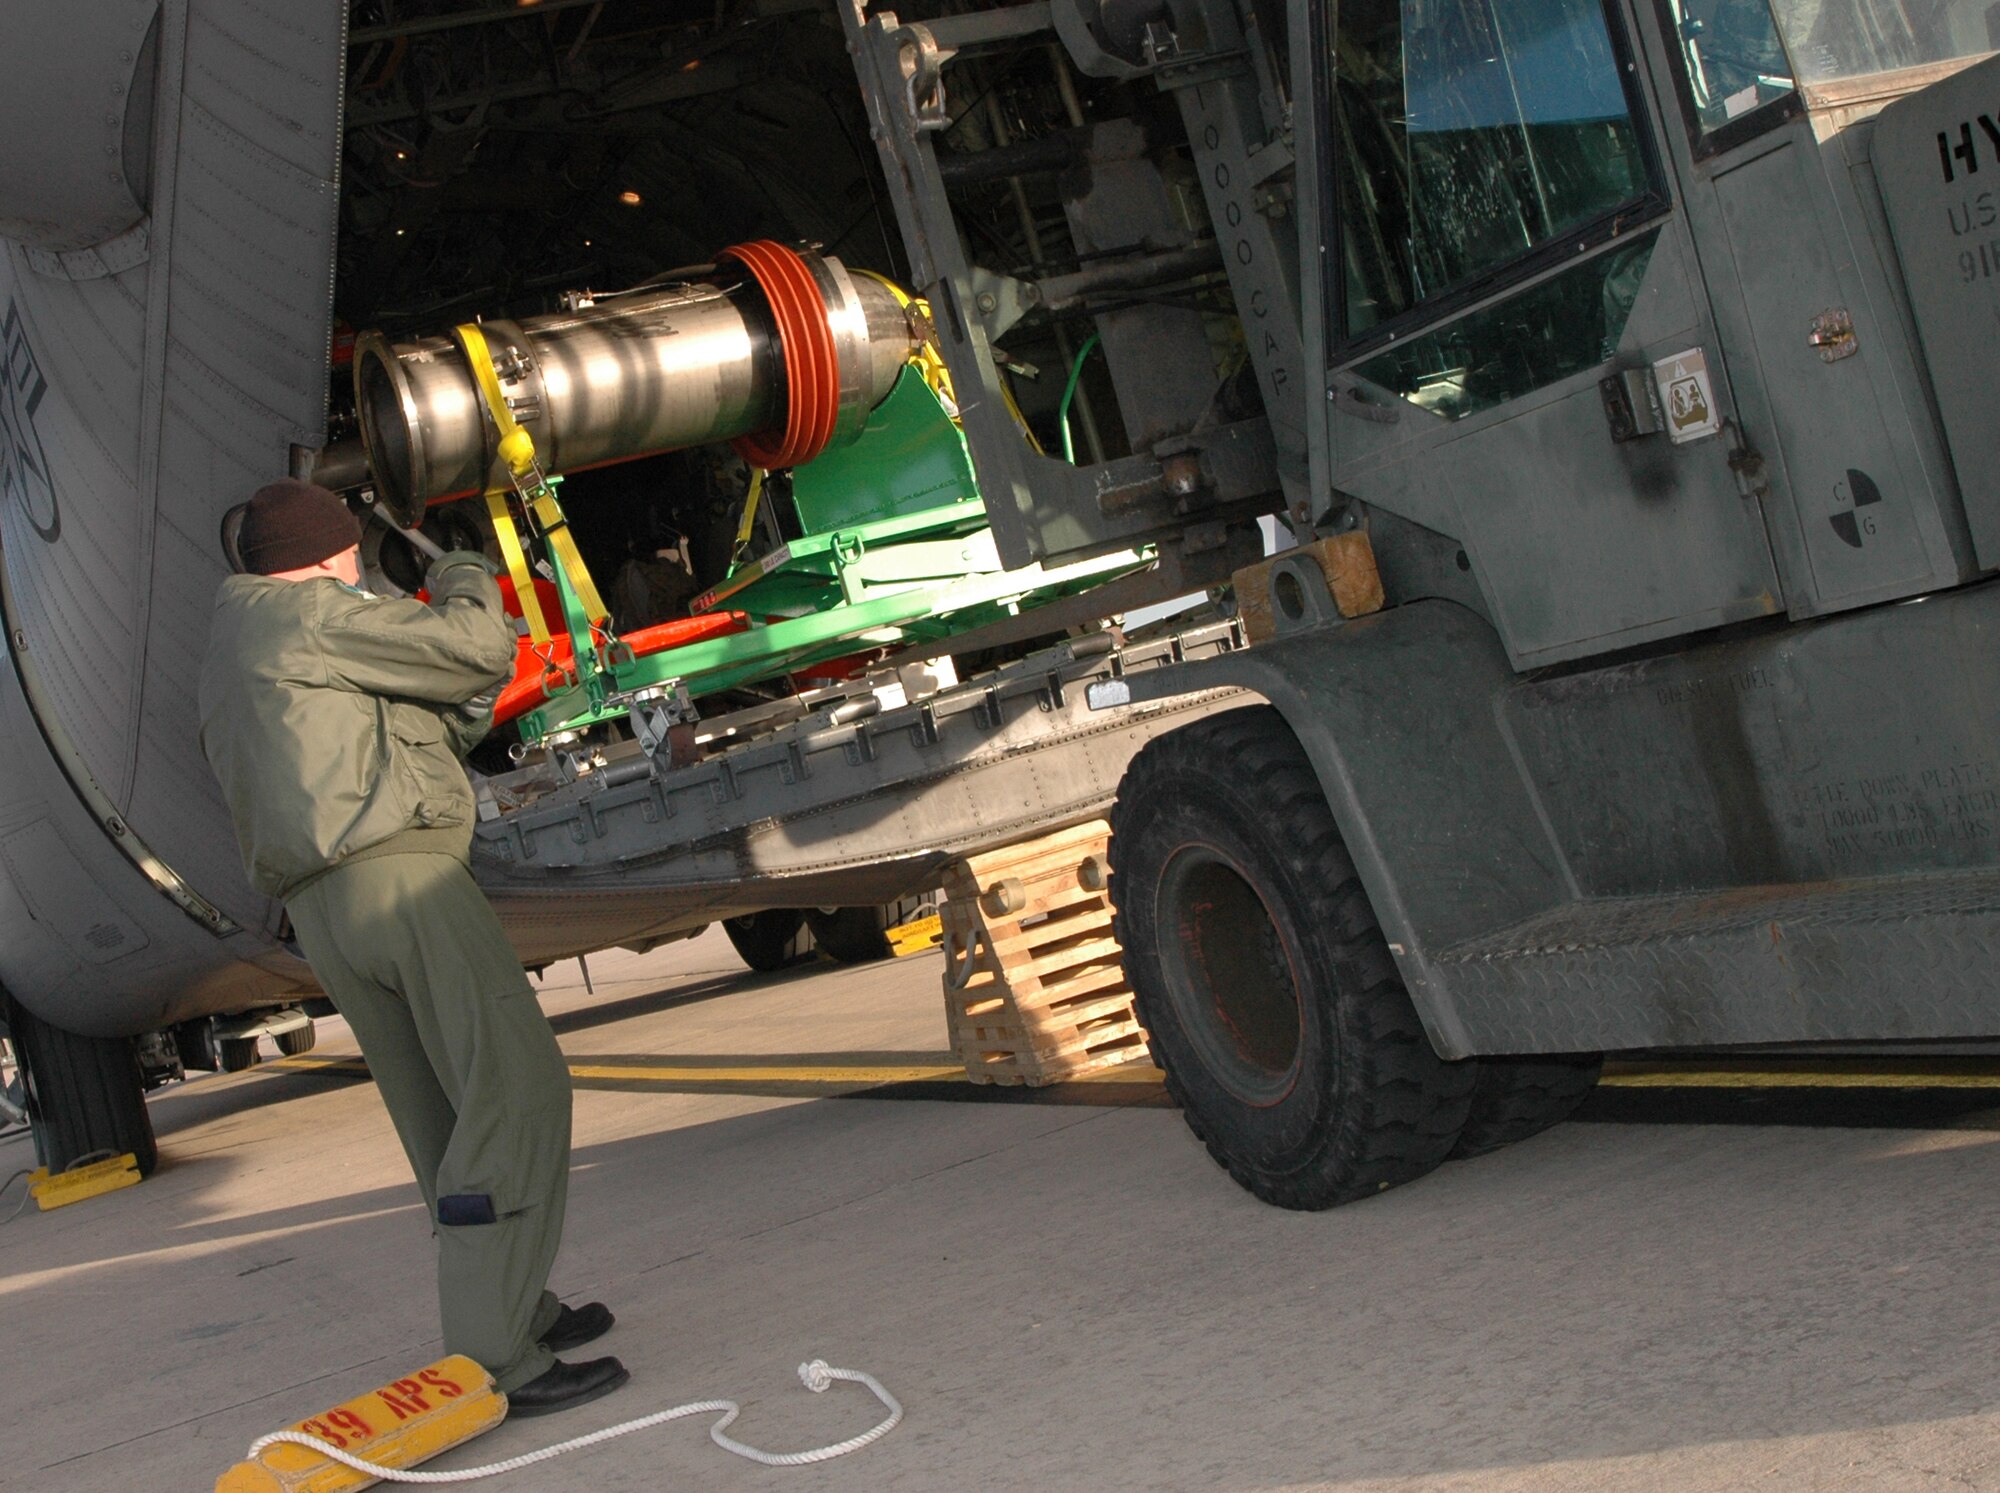 Senior Master Sgt. Derek Ashcraft directs a forklift driver on how to properly remove portions of a second-generation Military Airborne Firefighting System unit March 12, 2009, at Peterson Air Force Base, Colo. Known as MAFFS II, the unit augments the current MAFFS system, but is portable and self contained, making it more cost effective. Over time, MAFFS II will replace existing MAFFS units throughout the military's firefighting fleet supported by three Air National Guard wings as well as the Air Force Reserve's 302nd Airlift Wing at Peterson. Sergeant Ashcraft is a loadmaster with the 731st Airlift Squadron. (U.S. Air Force photo/Senior Airman Stephen Collier)